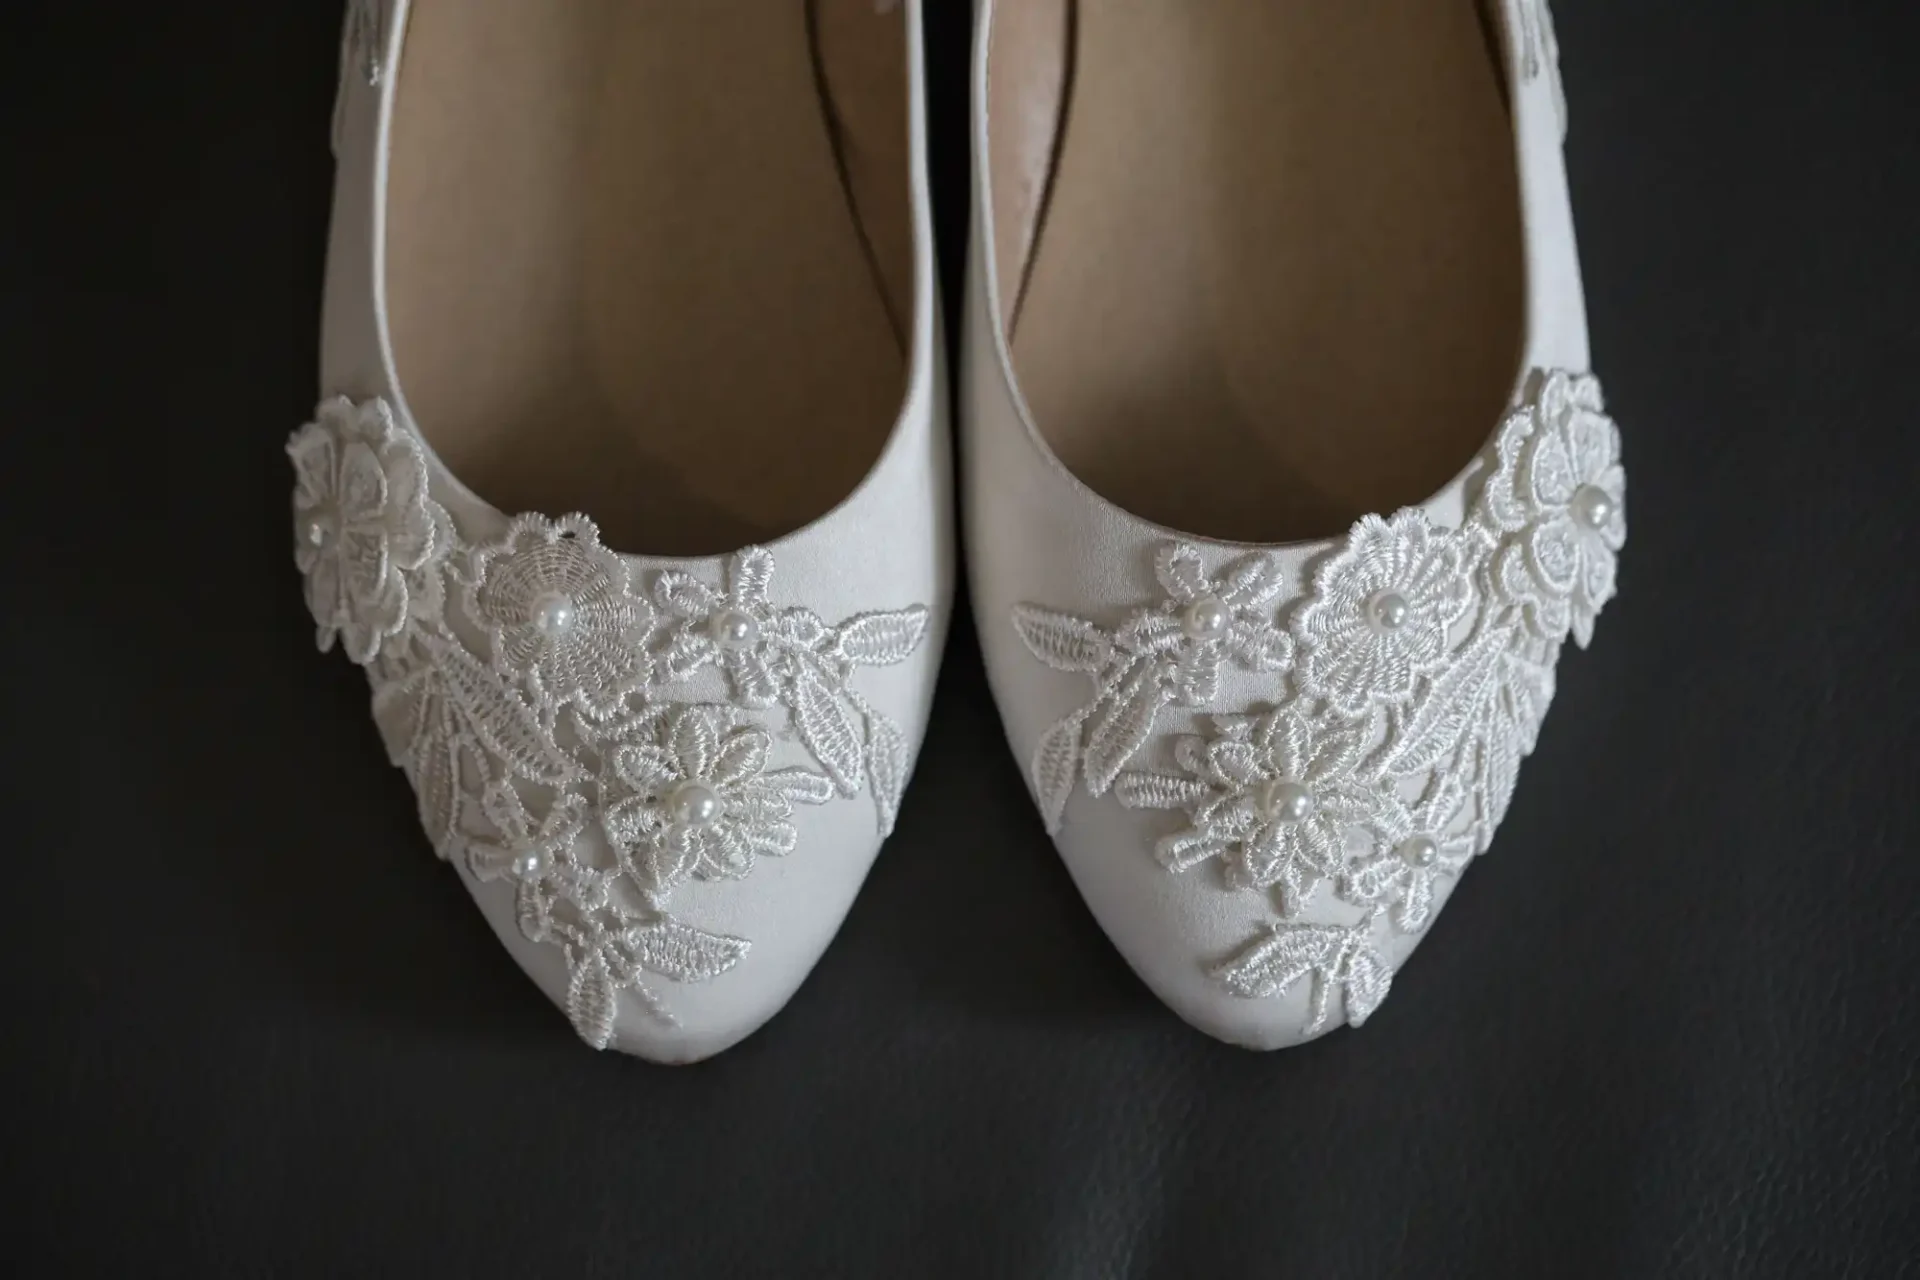 A pair of white bridal shoes with lace and bead detailing, displayed on a dark background.